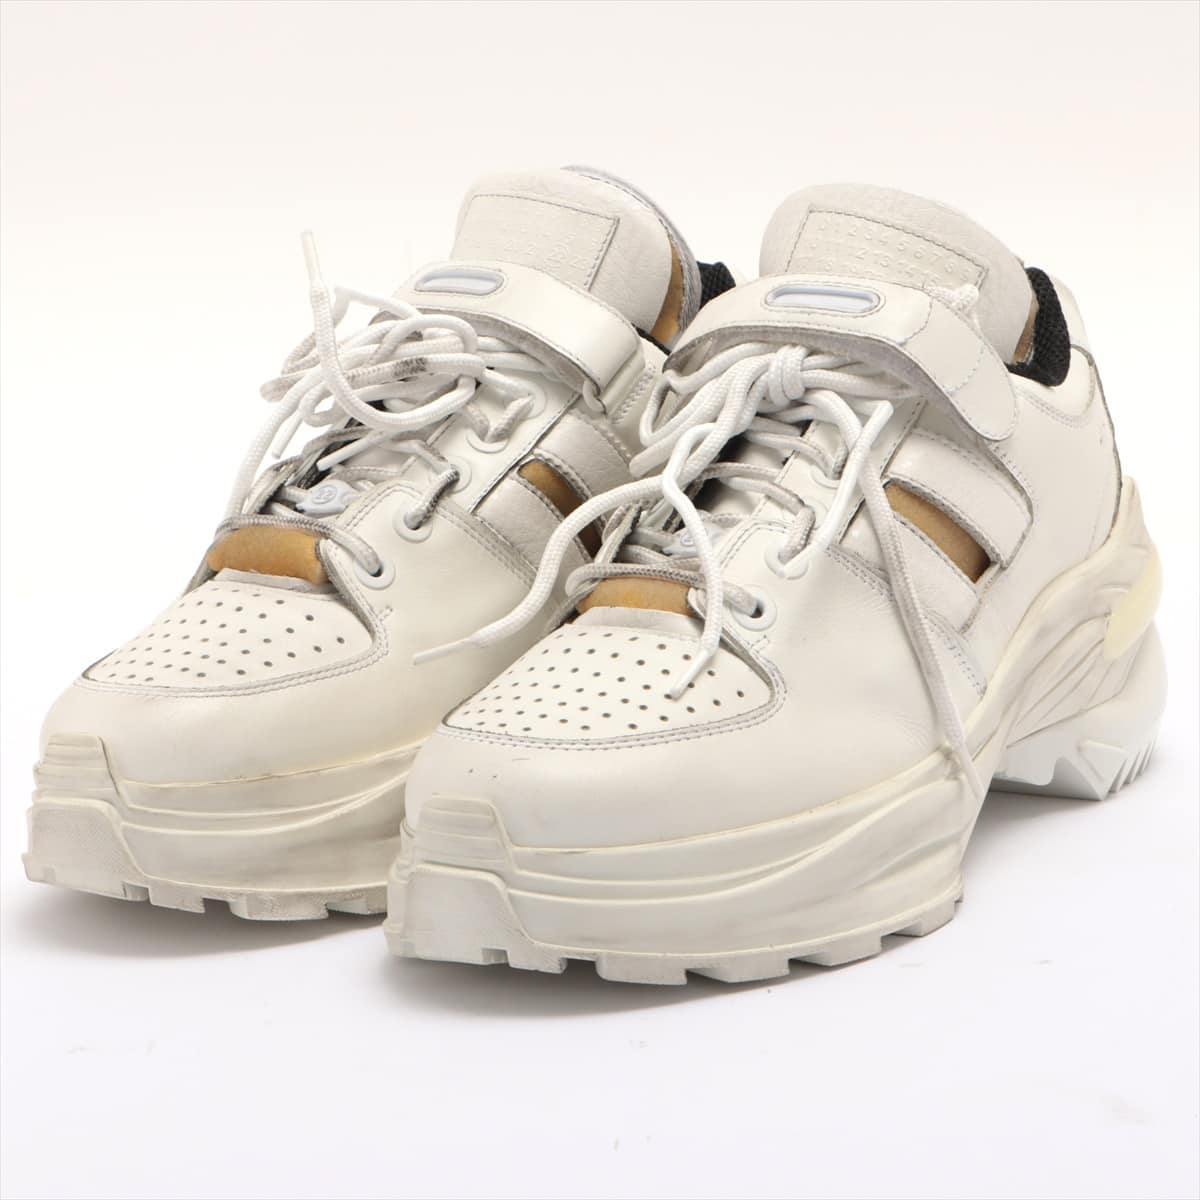 Maison Margiela Leather Sneakers 43 Men's White 22 retro fit chunky sneakers Vintage processing